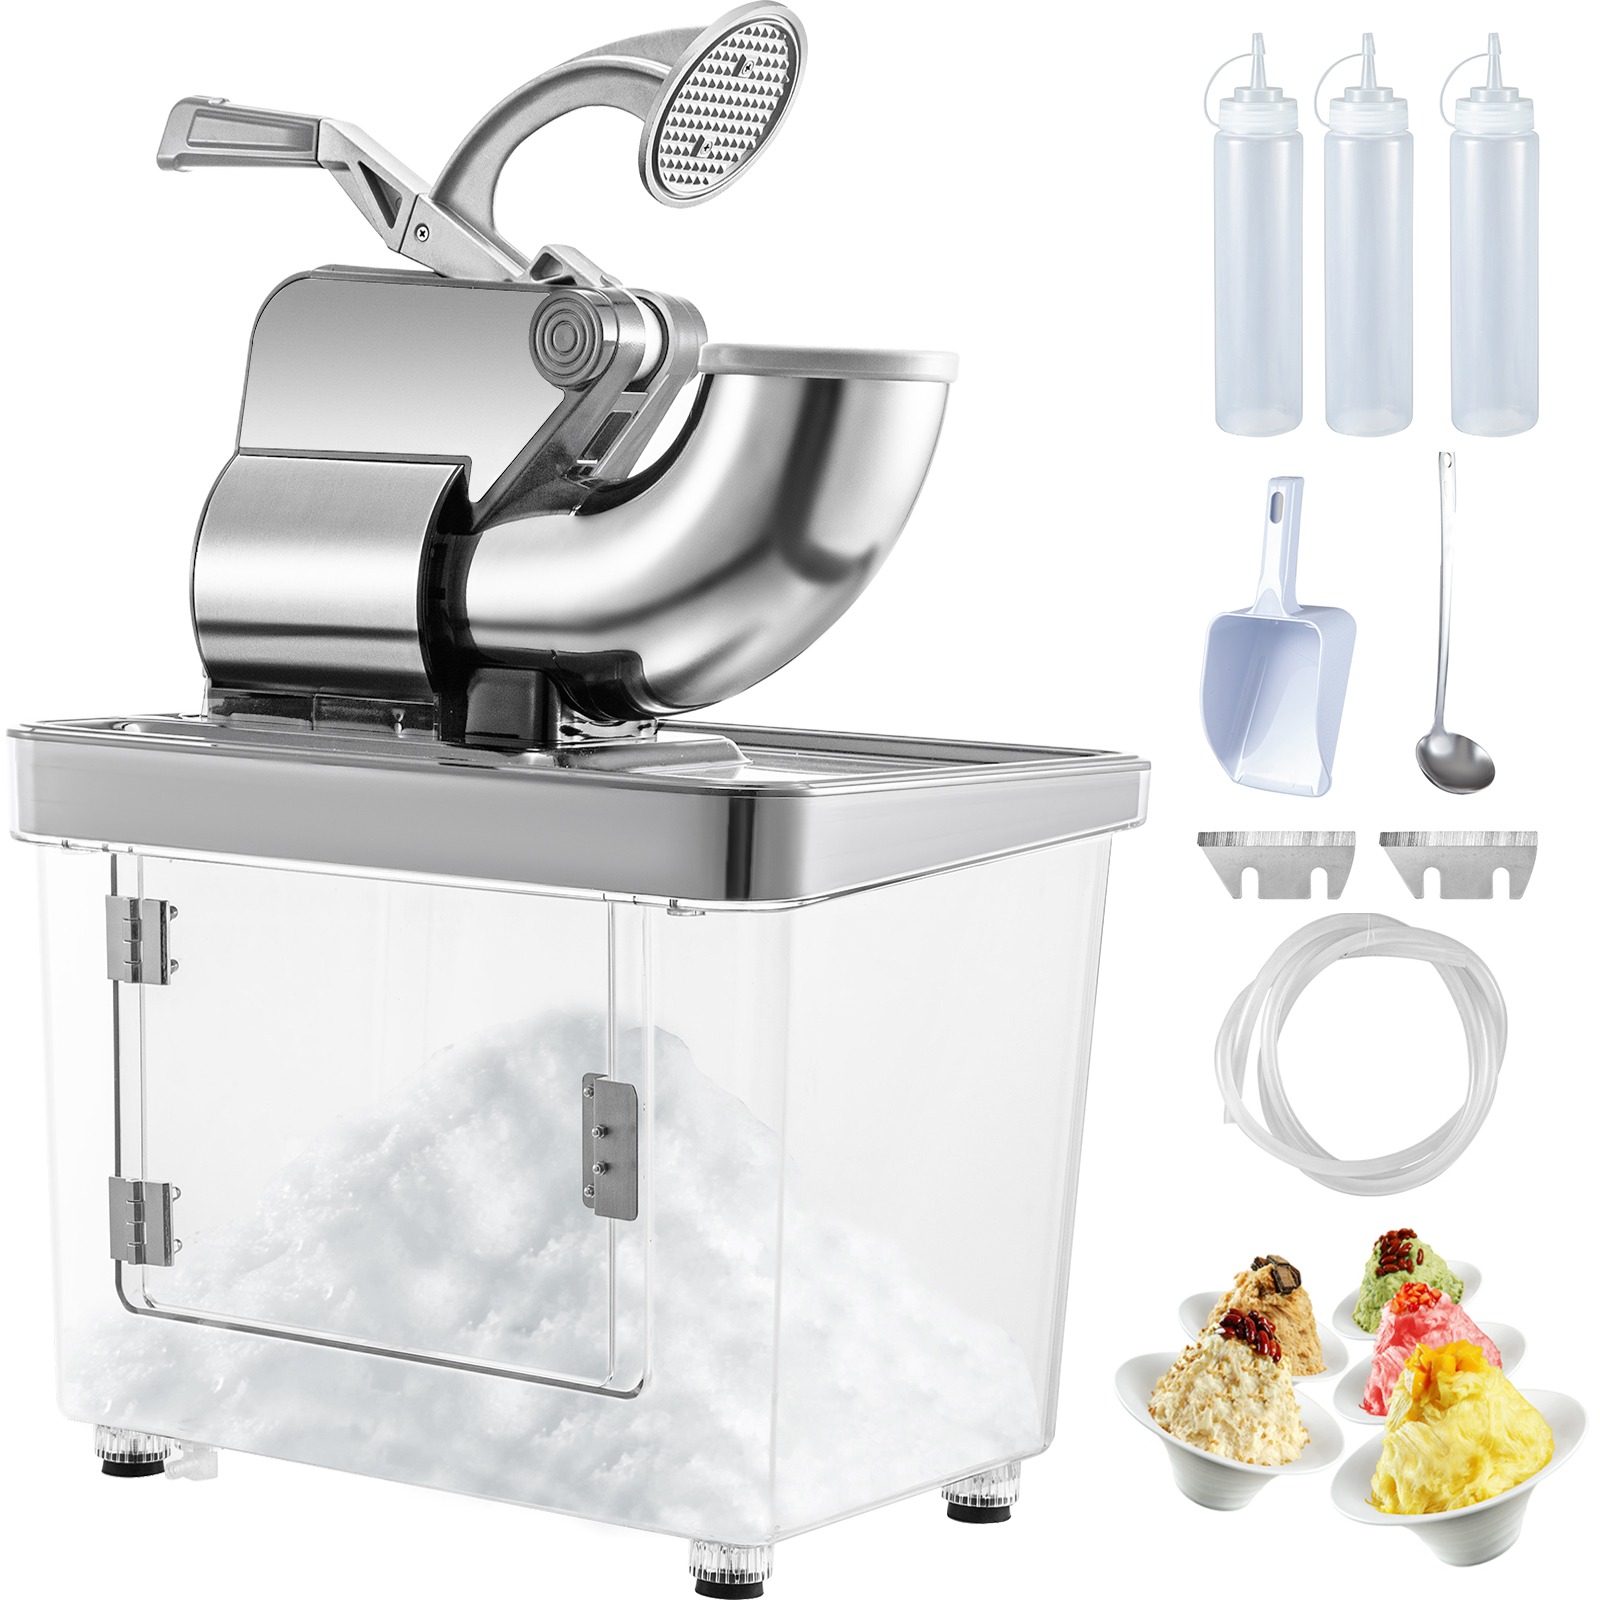 Machine Glace Pilee pas cher - Achat neuf et occasion